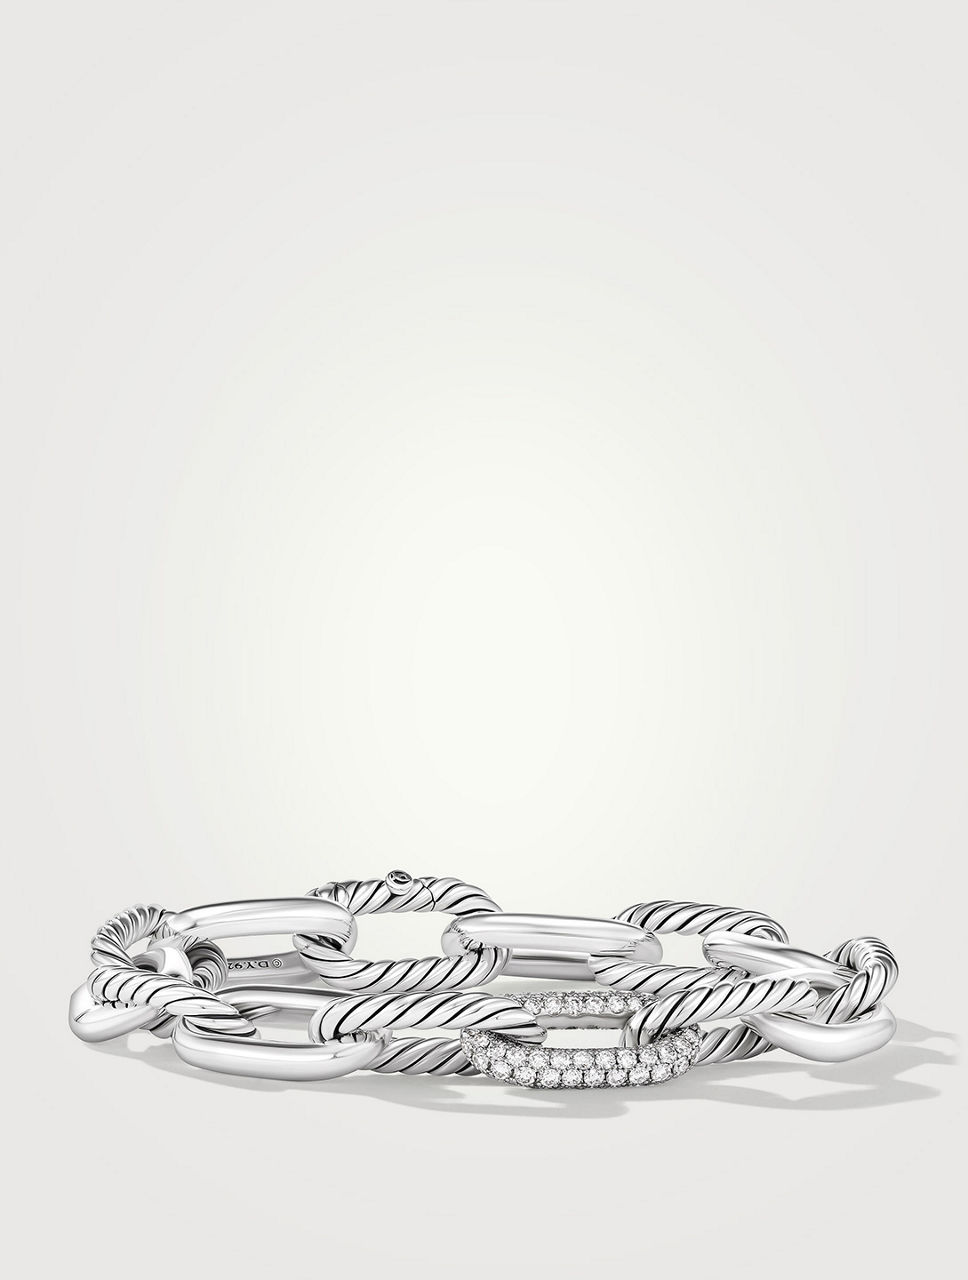 Dy Madison® Chain Bracelet In Sterling Silver With Diamonds, 11mm